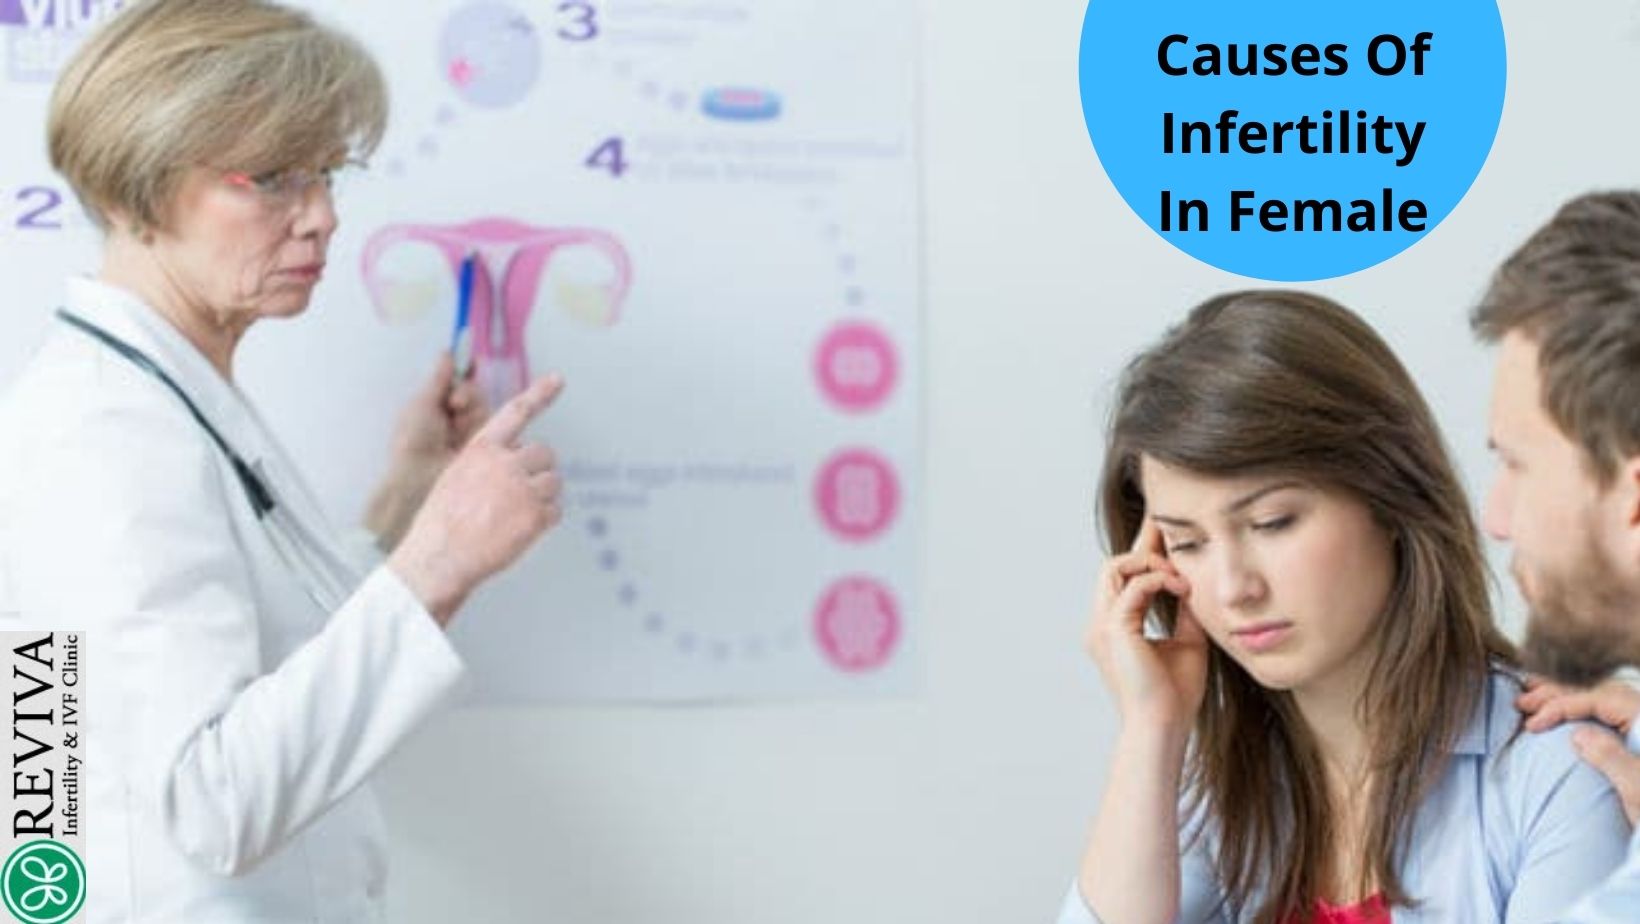 Causes Of Infertility In Female